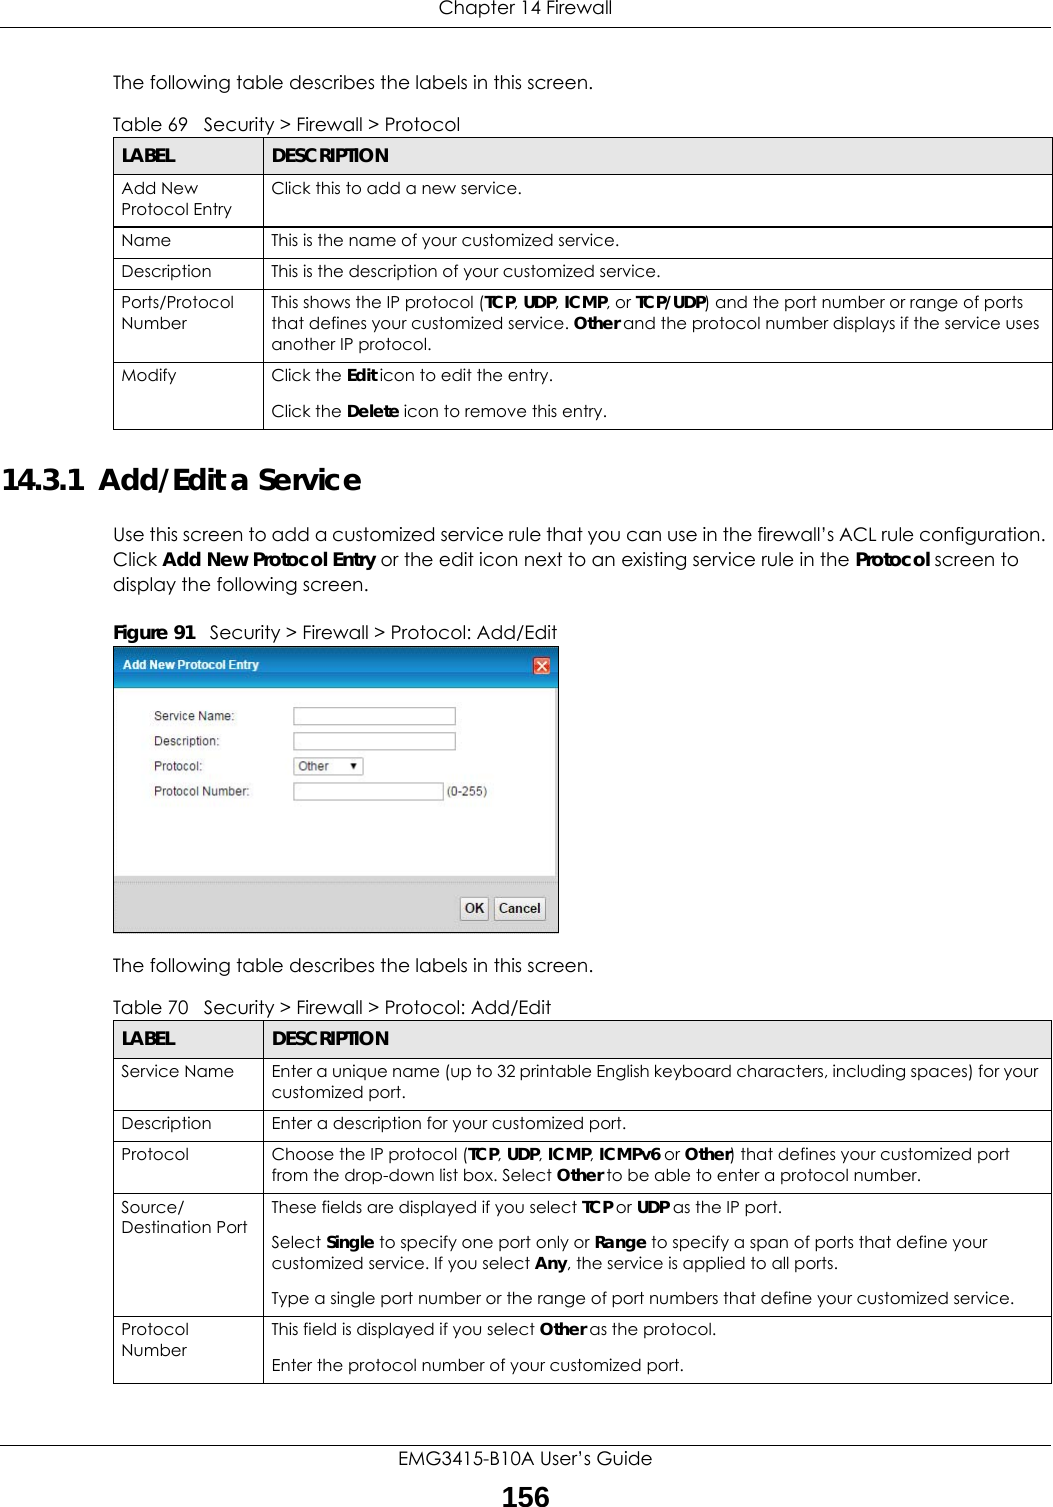 Chapter 14 FirewallEMG3415-B10A User’s Guide156The following table describes the labels in this screen. 14.3.1  Add/Edit a Service Use this screen to add a customized service rule that you can use in the firewall’s ACL rule configuration. Click Add New Protocol Entry or the edit icon next to an existing service rule in the Protocol screen to display the following screen.Figure 91   Security &gt; Firewall &gt; Protocol: Add/EditThe following table describes the labels in this screen.Table 69   Security &gt; Firewall &gt; ProtocolLABEL DESCRIPTIONAdd New Protocol EntryClick this to add a new service.Name This is the name of your customized service.Description This is the description of your customized service.Ports/Protocol NumberThis shows the IP protocol (TCP, UDP, ICMP, or TCP/UDP) and the port number or range of ports that defines your customized service. Other and the protocol number displays if the service uses another IP protocol.Modify Click the Edit icon to edit the entry.Click the Delete icon to remove this entry.Table 70   Security &gt; Firewall &gt; Protocol: Add/EditLABEL DESCRIPTIONService Name Enter a unique name (up to 32 printable English keyboard characters, including spaces) for your customized port. Description Enter a description for your customized port.Protocol Choose the IP protocol (TCP, UDP, ICMP, ICMPv6 or Other) that defines your customized port from the drop-down list box. Select Other to be able to enter a protocol number.Source/Destination PortThese fields are displayed if you select TCP or UDP as the IP port. Select Single to specify one port only or Range to specify a span of ports that define your customized service. If you select Any, the service is applied to all ports.Type a single port number or the range of port numbers that define your customized service.Protocol NumberThis field is displayed if you select Other as the protocol.Enter the protocol number of your customized port. 